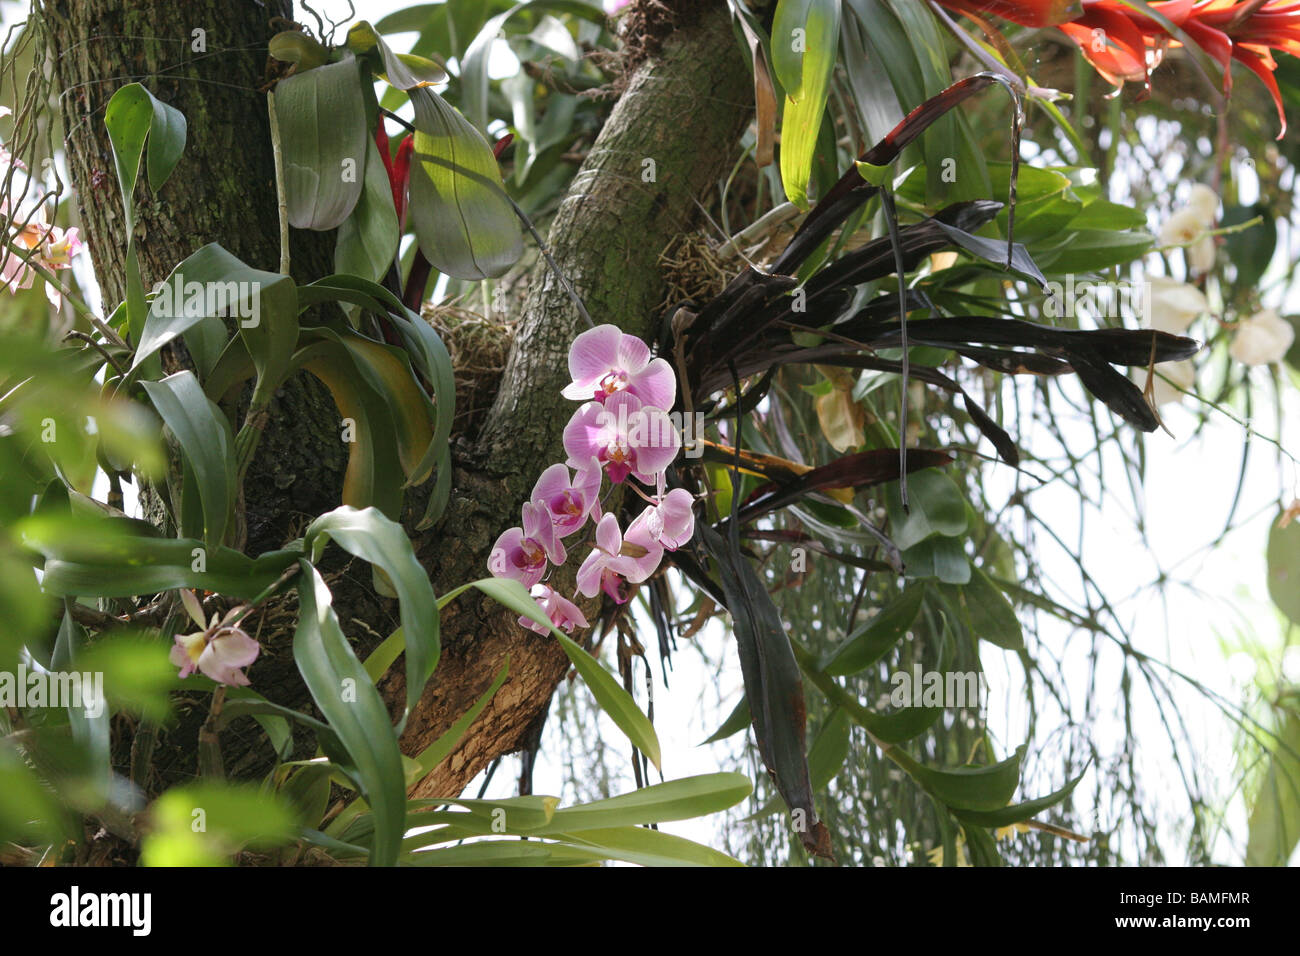 orchids and bromeliads growing in the trees Stock Photo